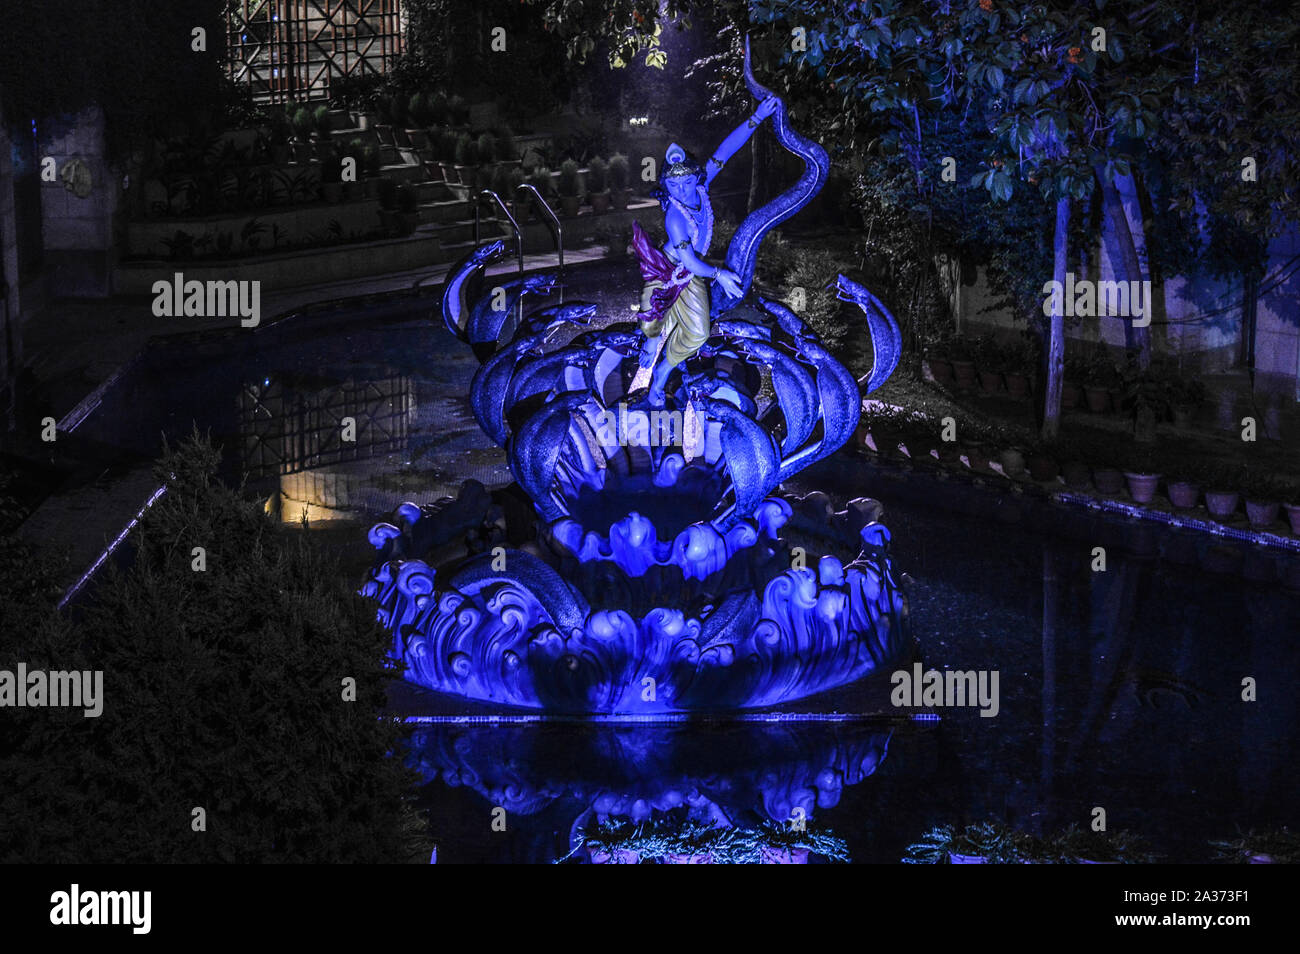 Lord krishna doing dance on the snake with blue light on iskcon temple new delhi india Stock Photo